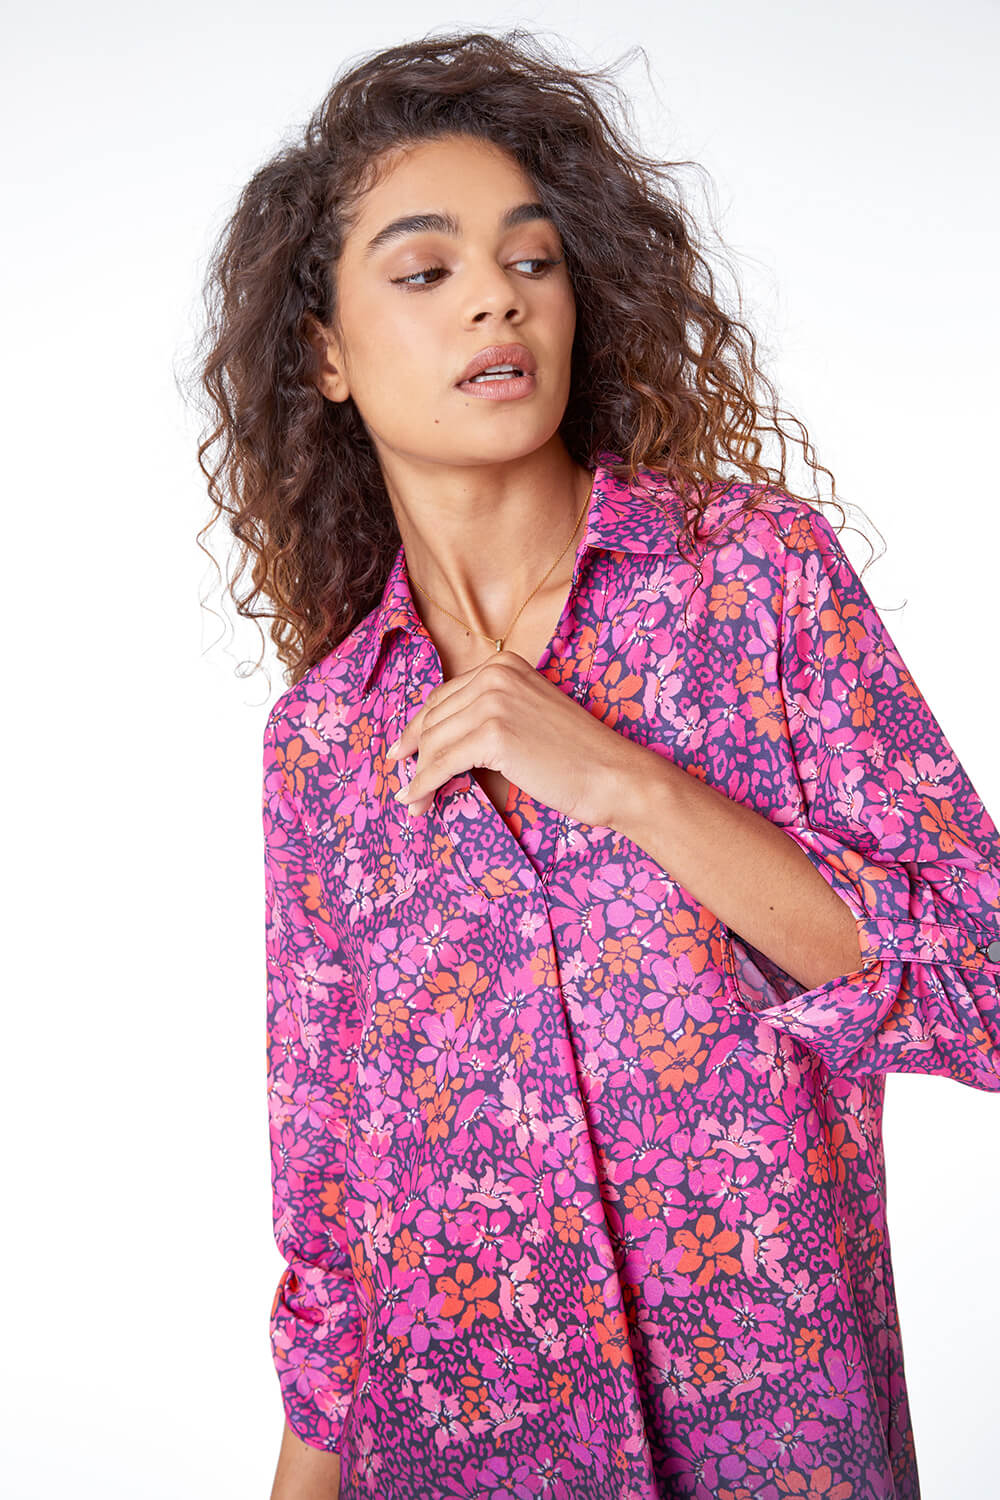 PINK Floral Print Ombre Collared Overshirt, Image 4 of 5